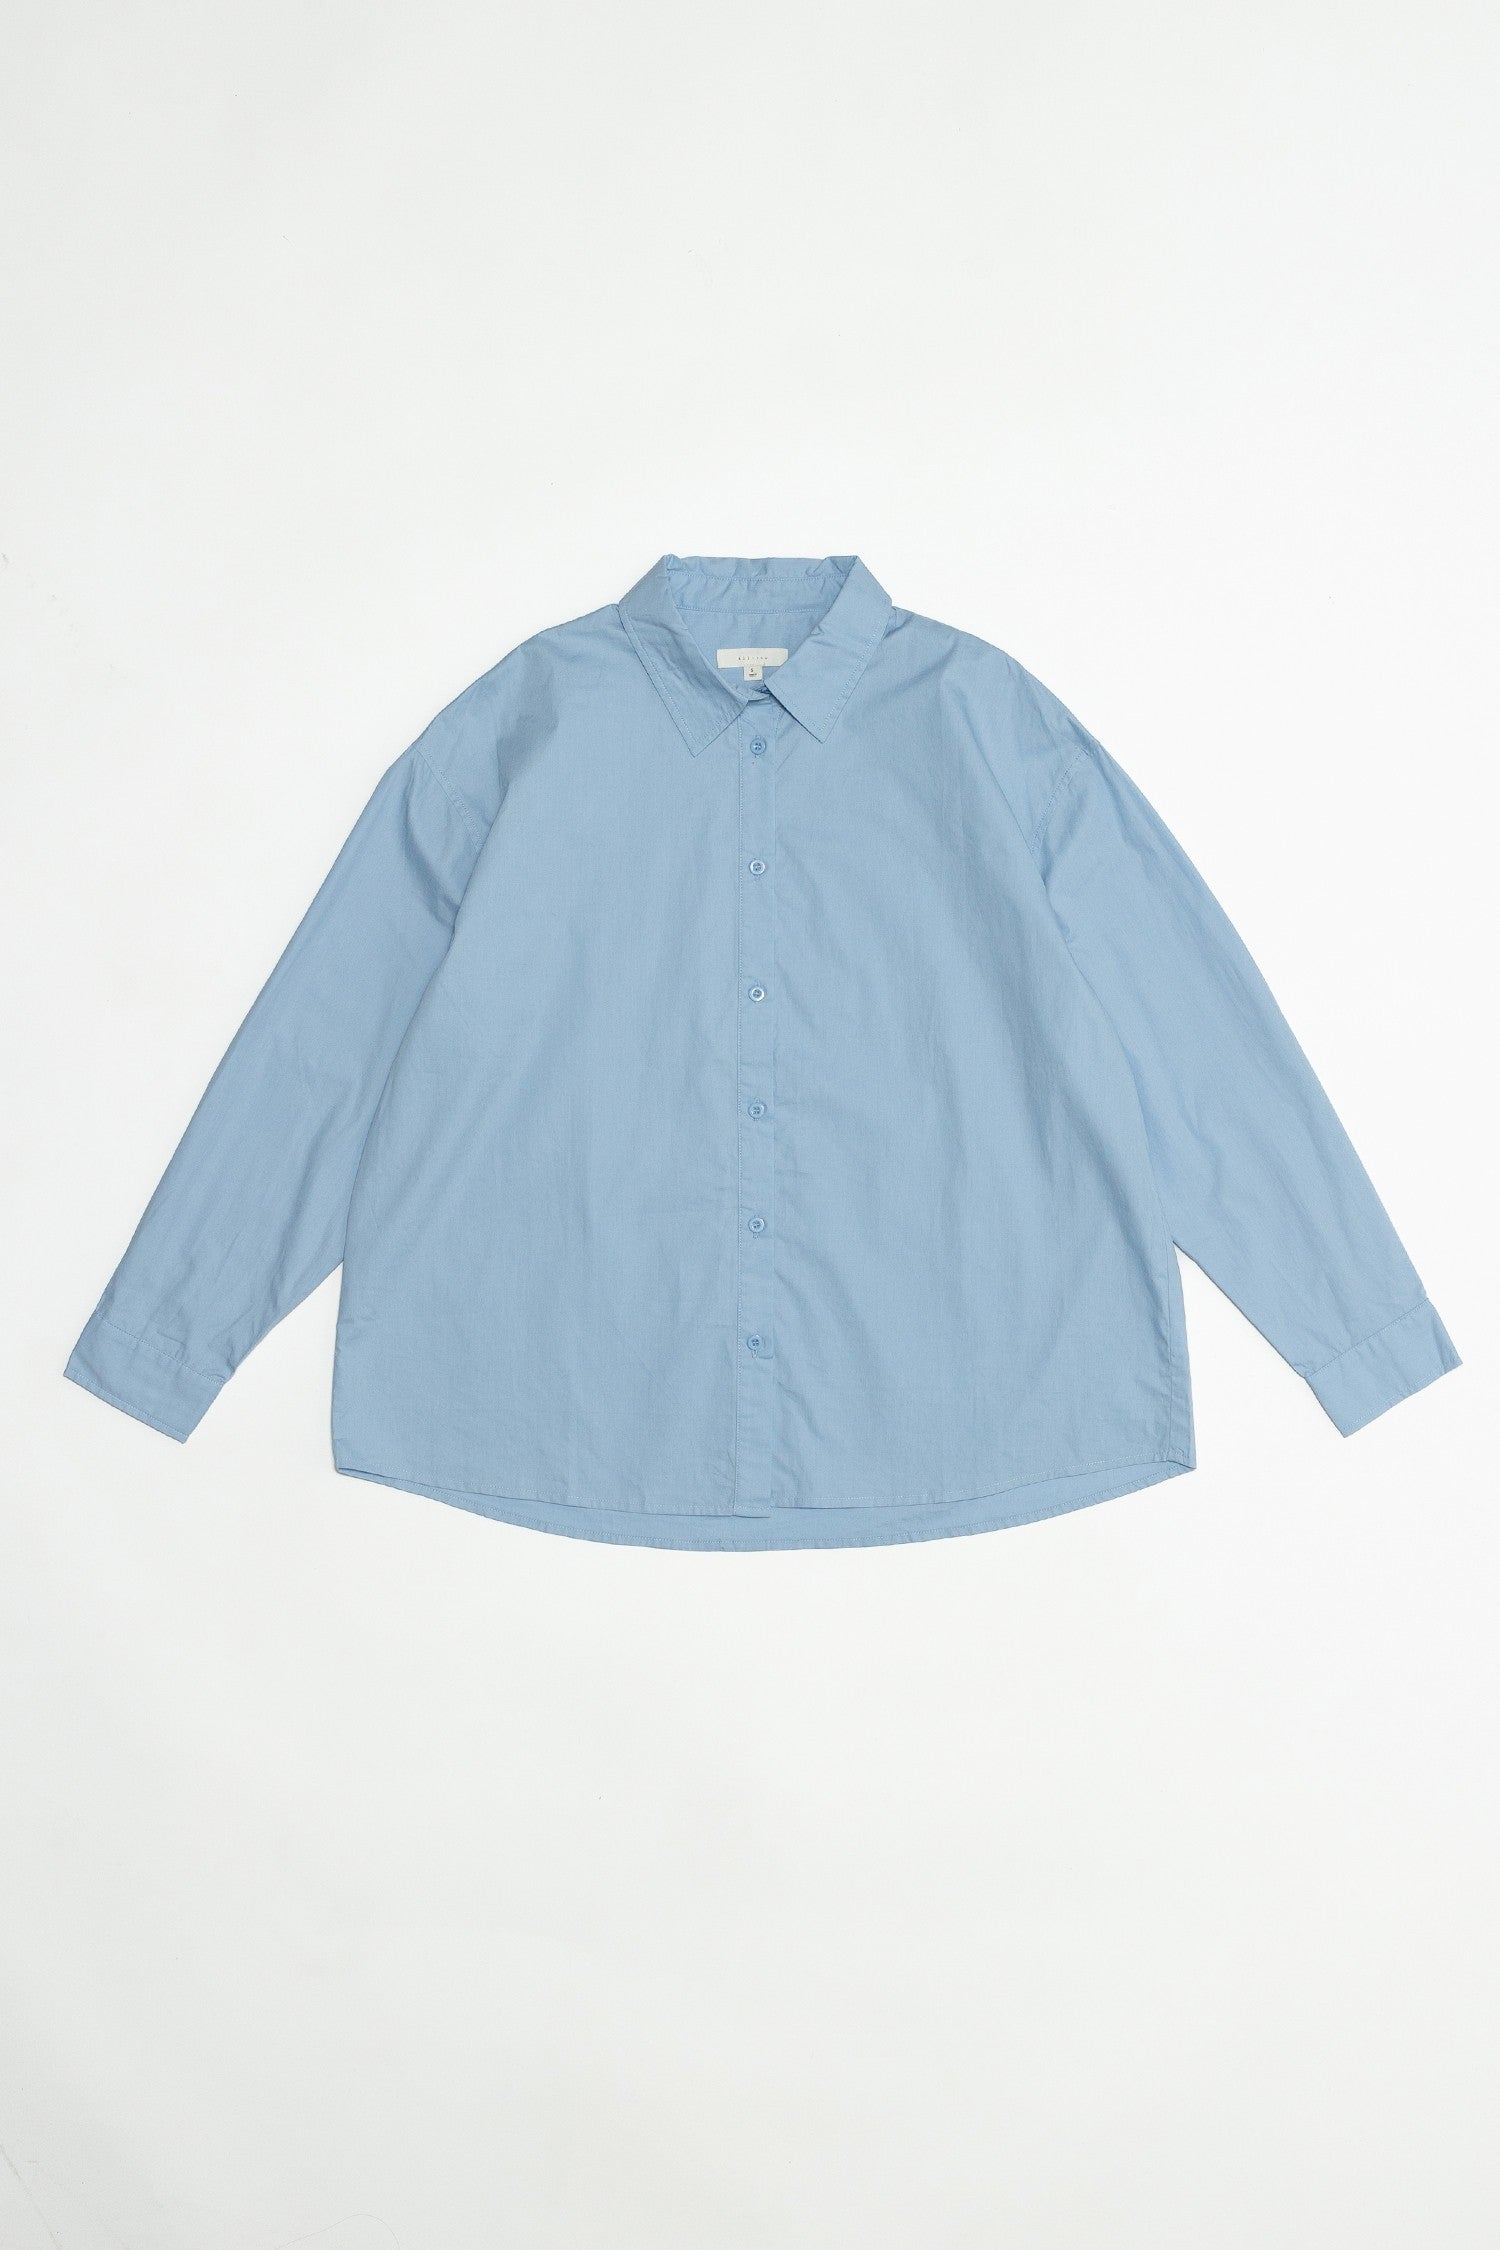 Photo of the oversized blue button up shirt making it a perfect staple piece in your wardrobe. 